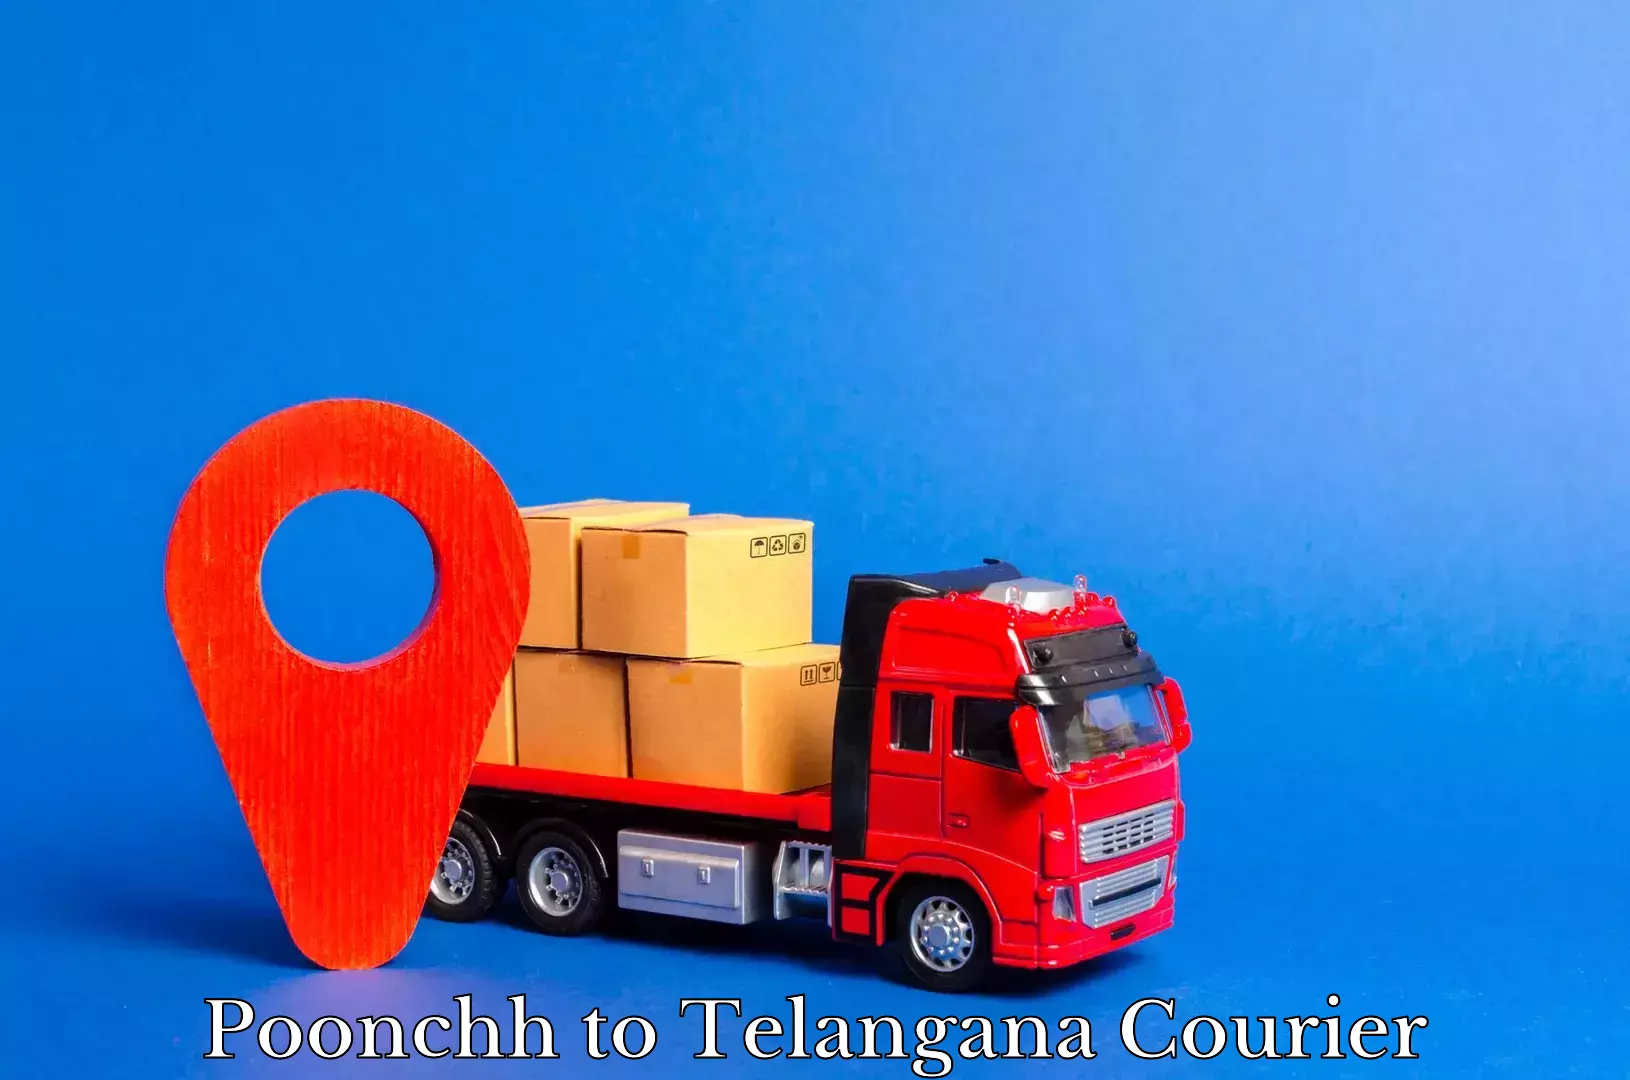 Global courier networks Poonchh to Telangana